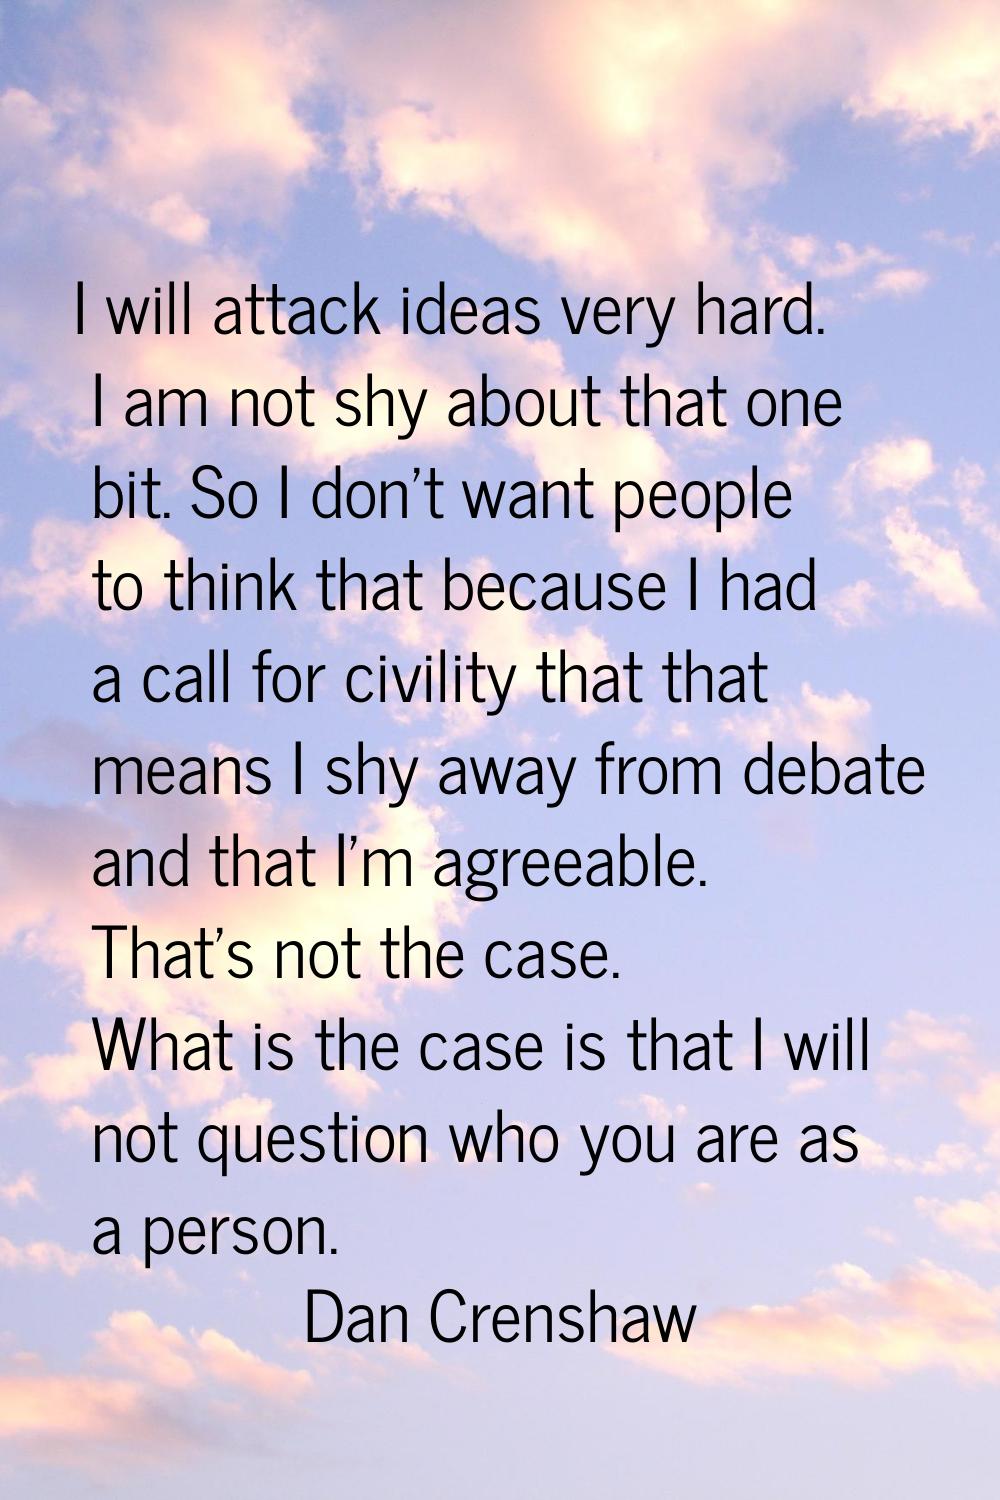 I will attack ideas very hard. I am not shy about that one bit. So I don't want people to think tha